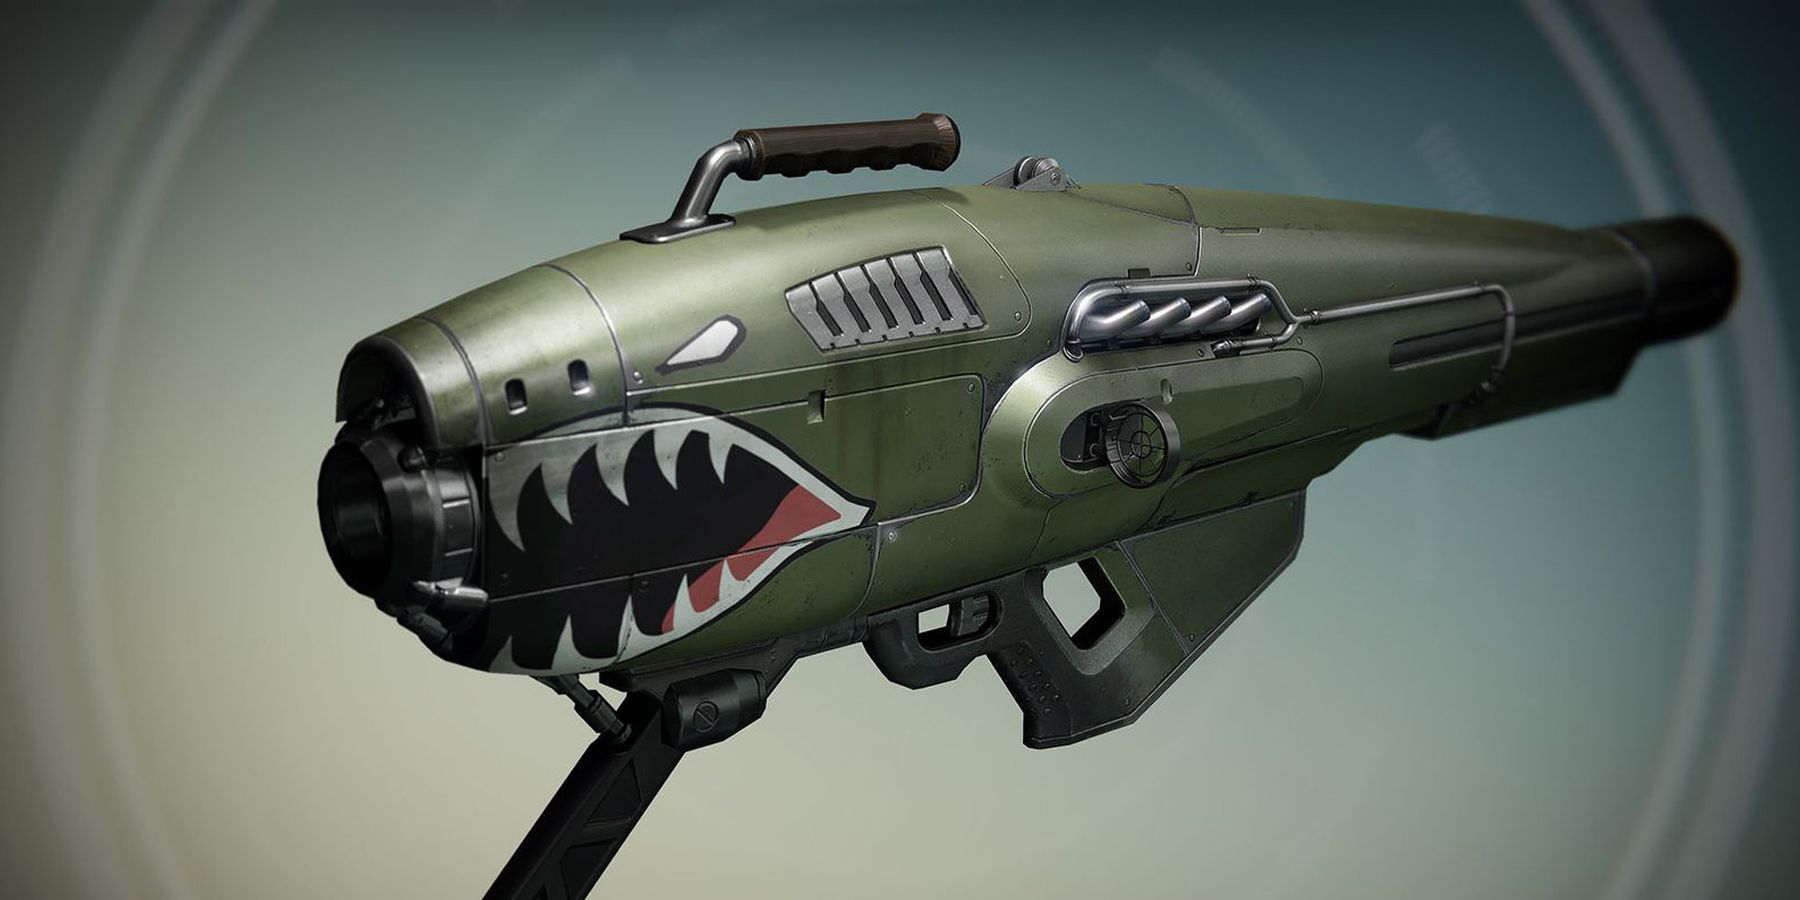 The Dragon's Breath exotic rocket launcher made by Crux/Lomar from the first Destiny game.